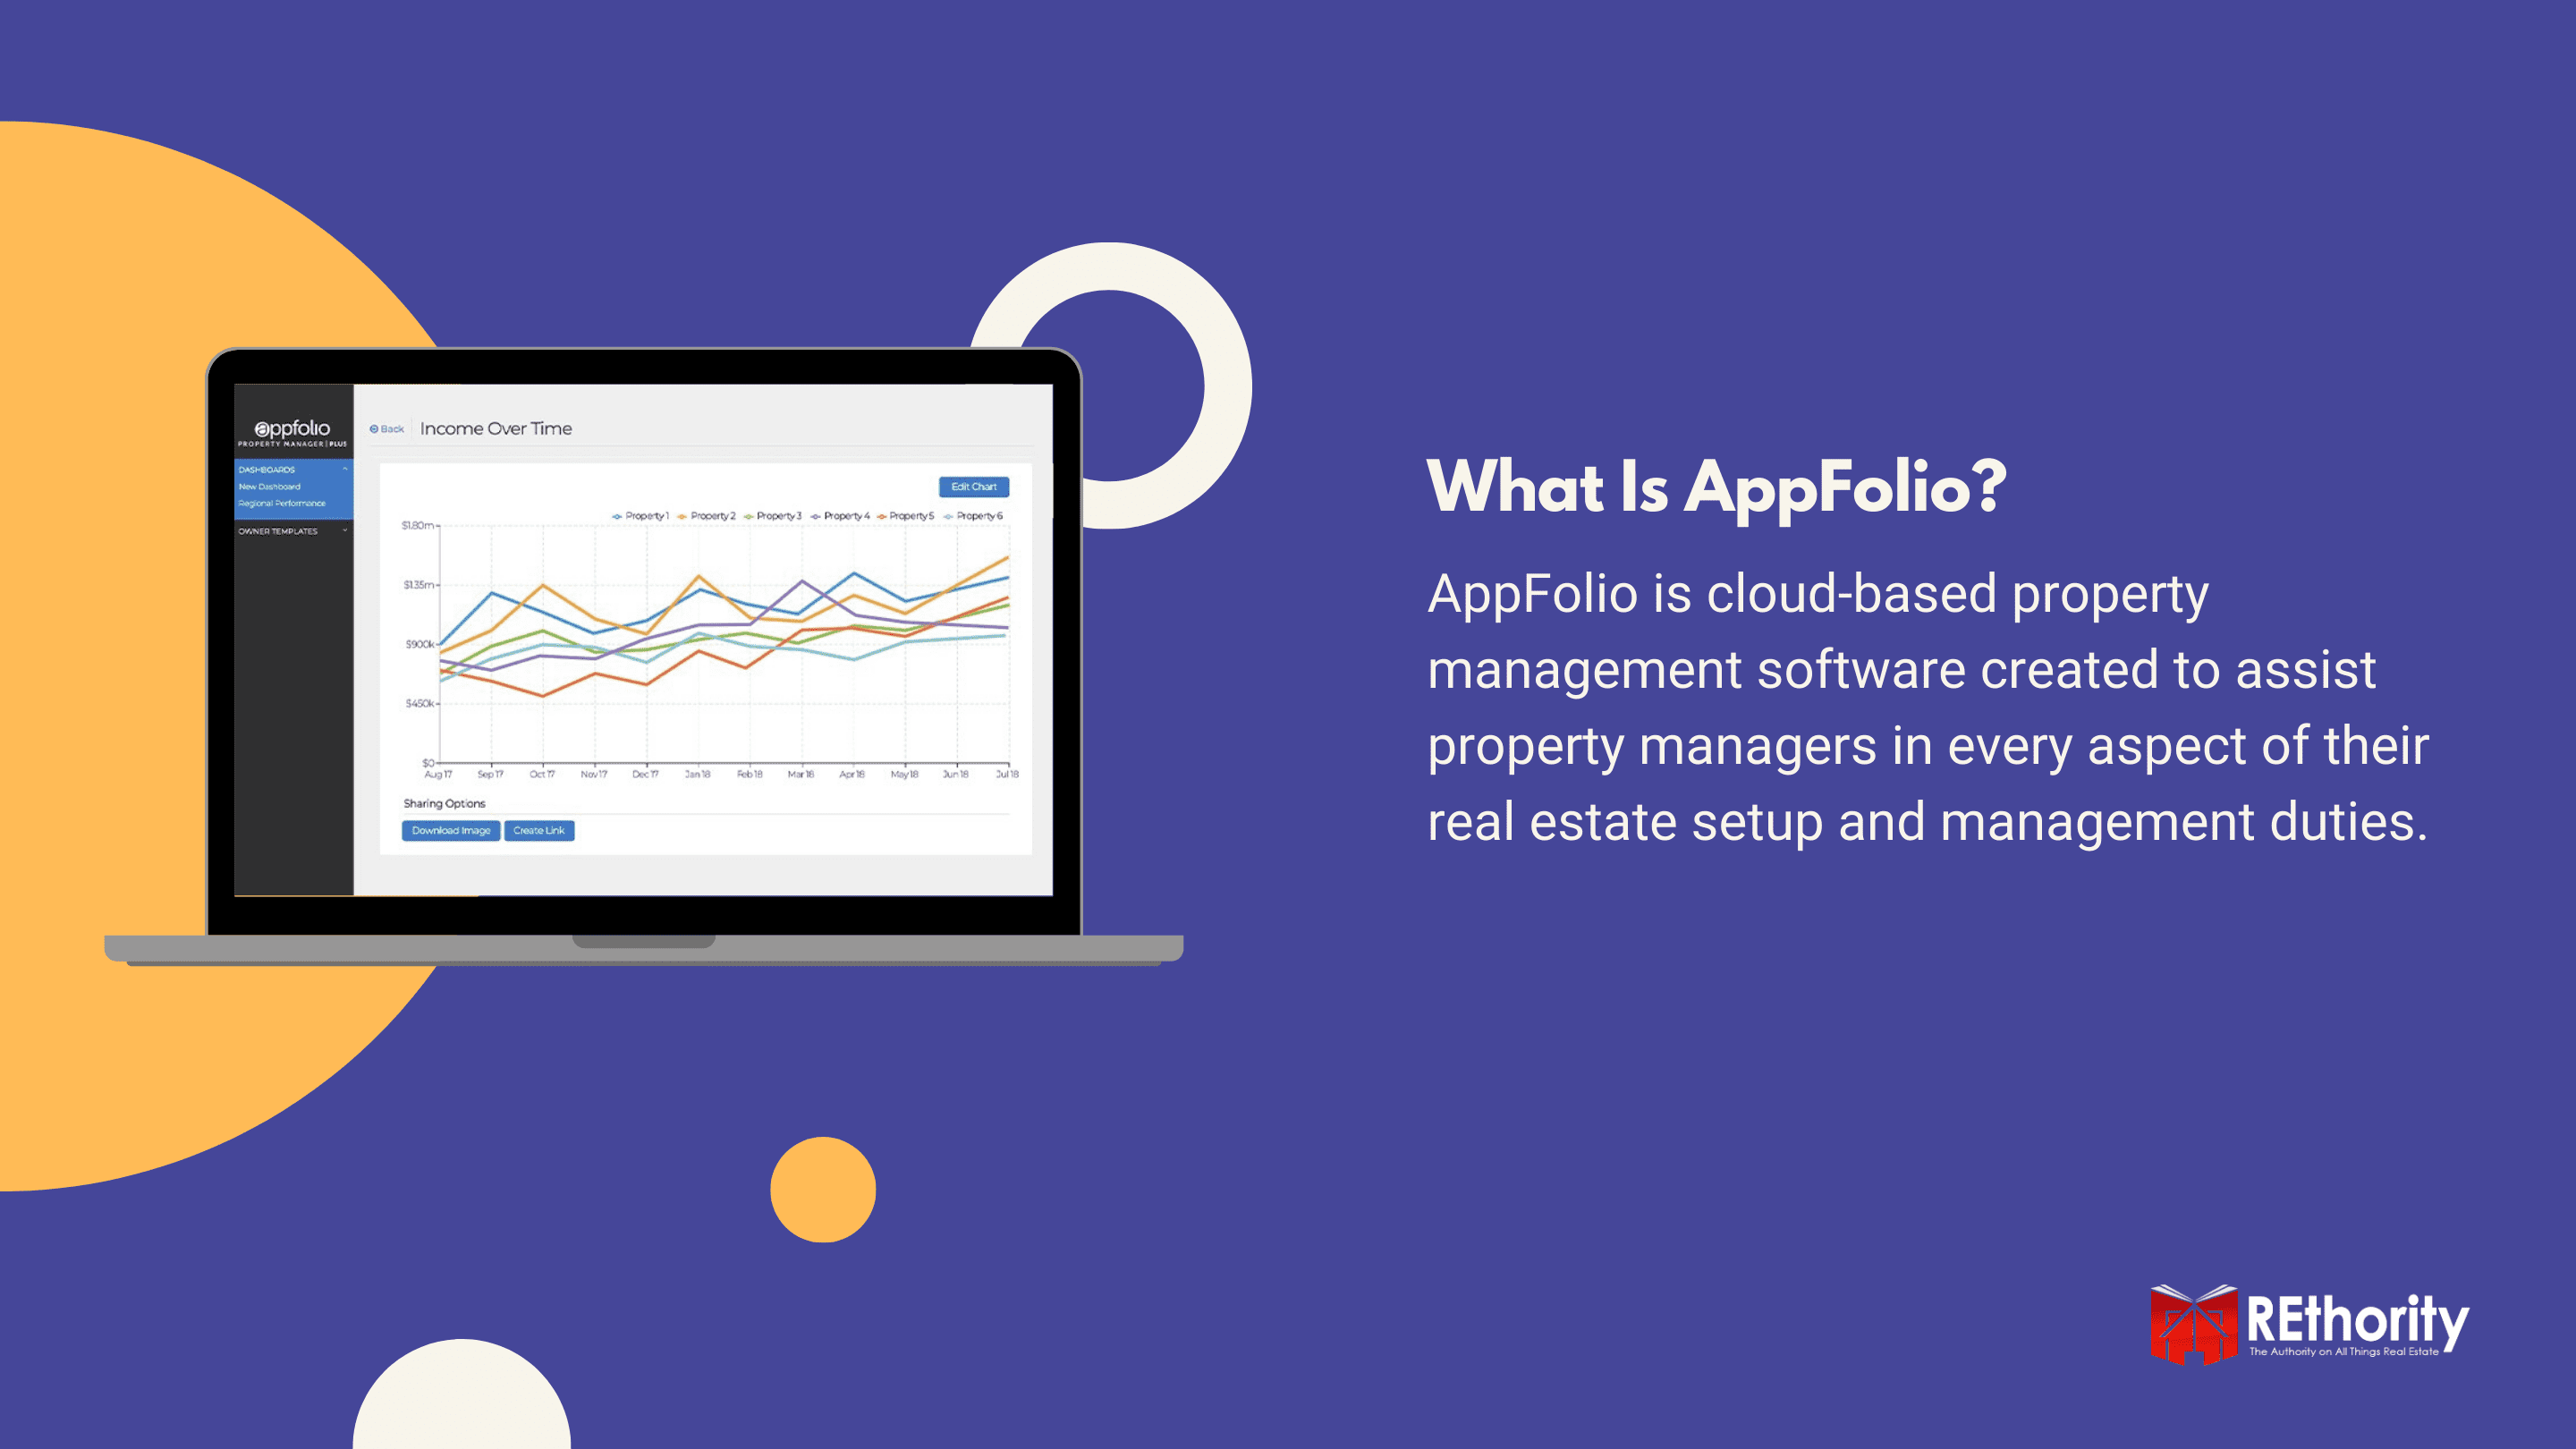 AppFolio is cloud-based property management software. It was created to assist property managers in every aspect of their real estate setup, helping to enhance your operations as you increase your productivity.